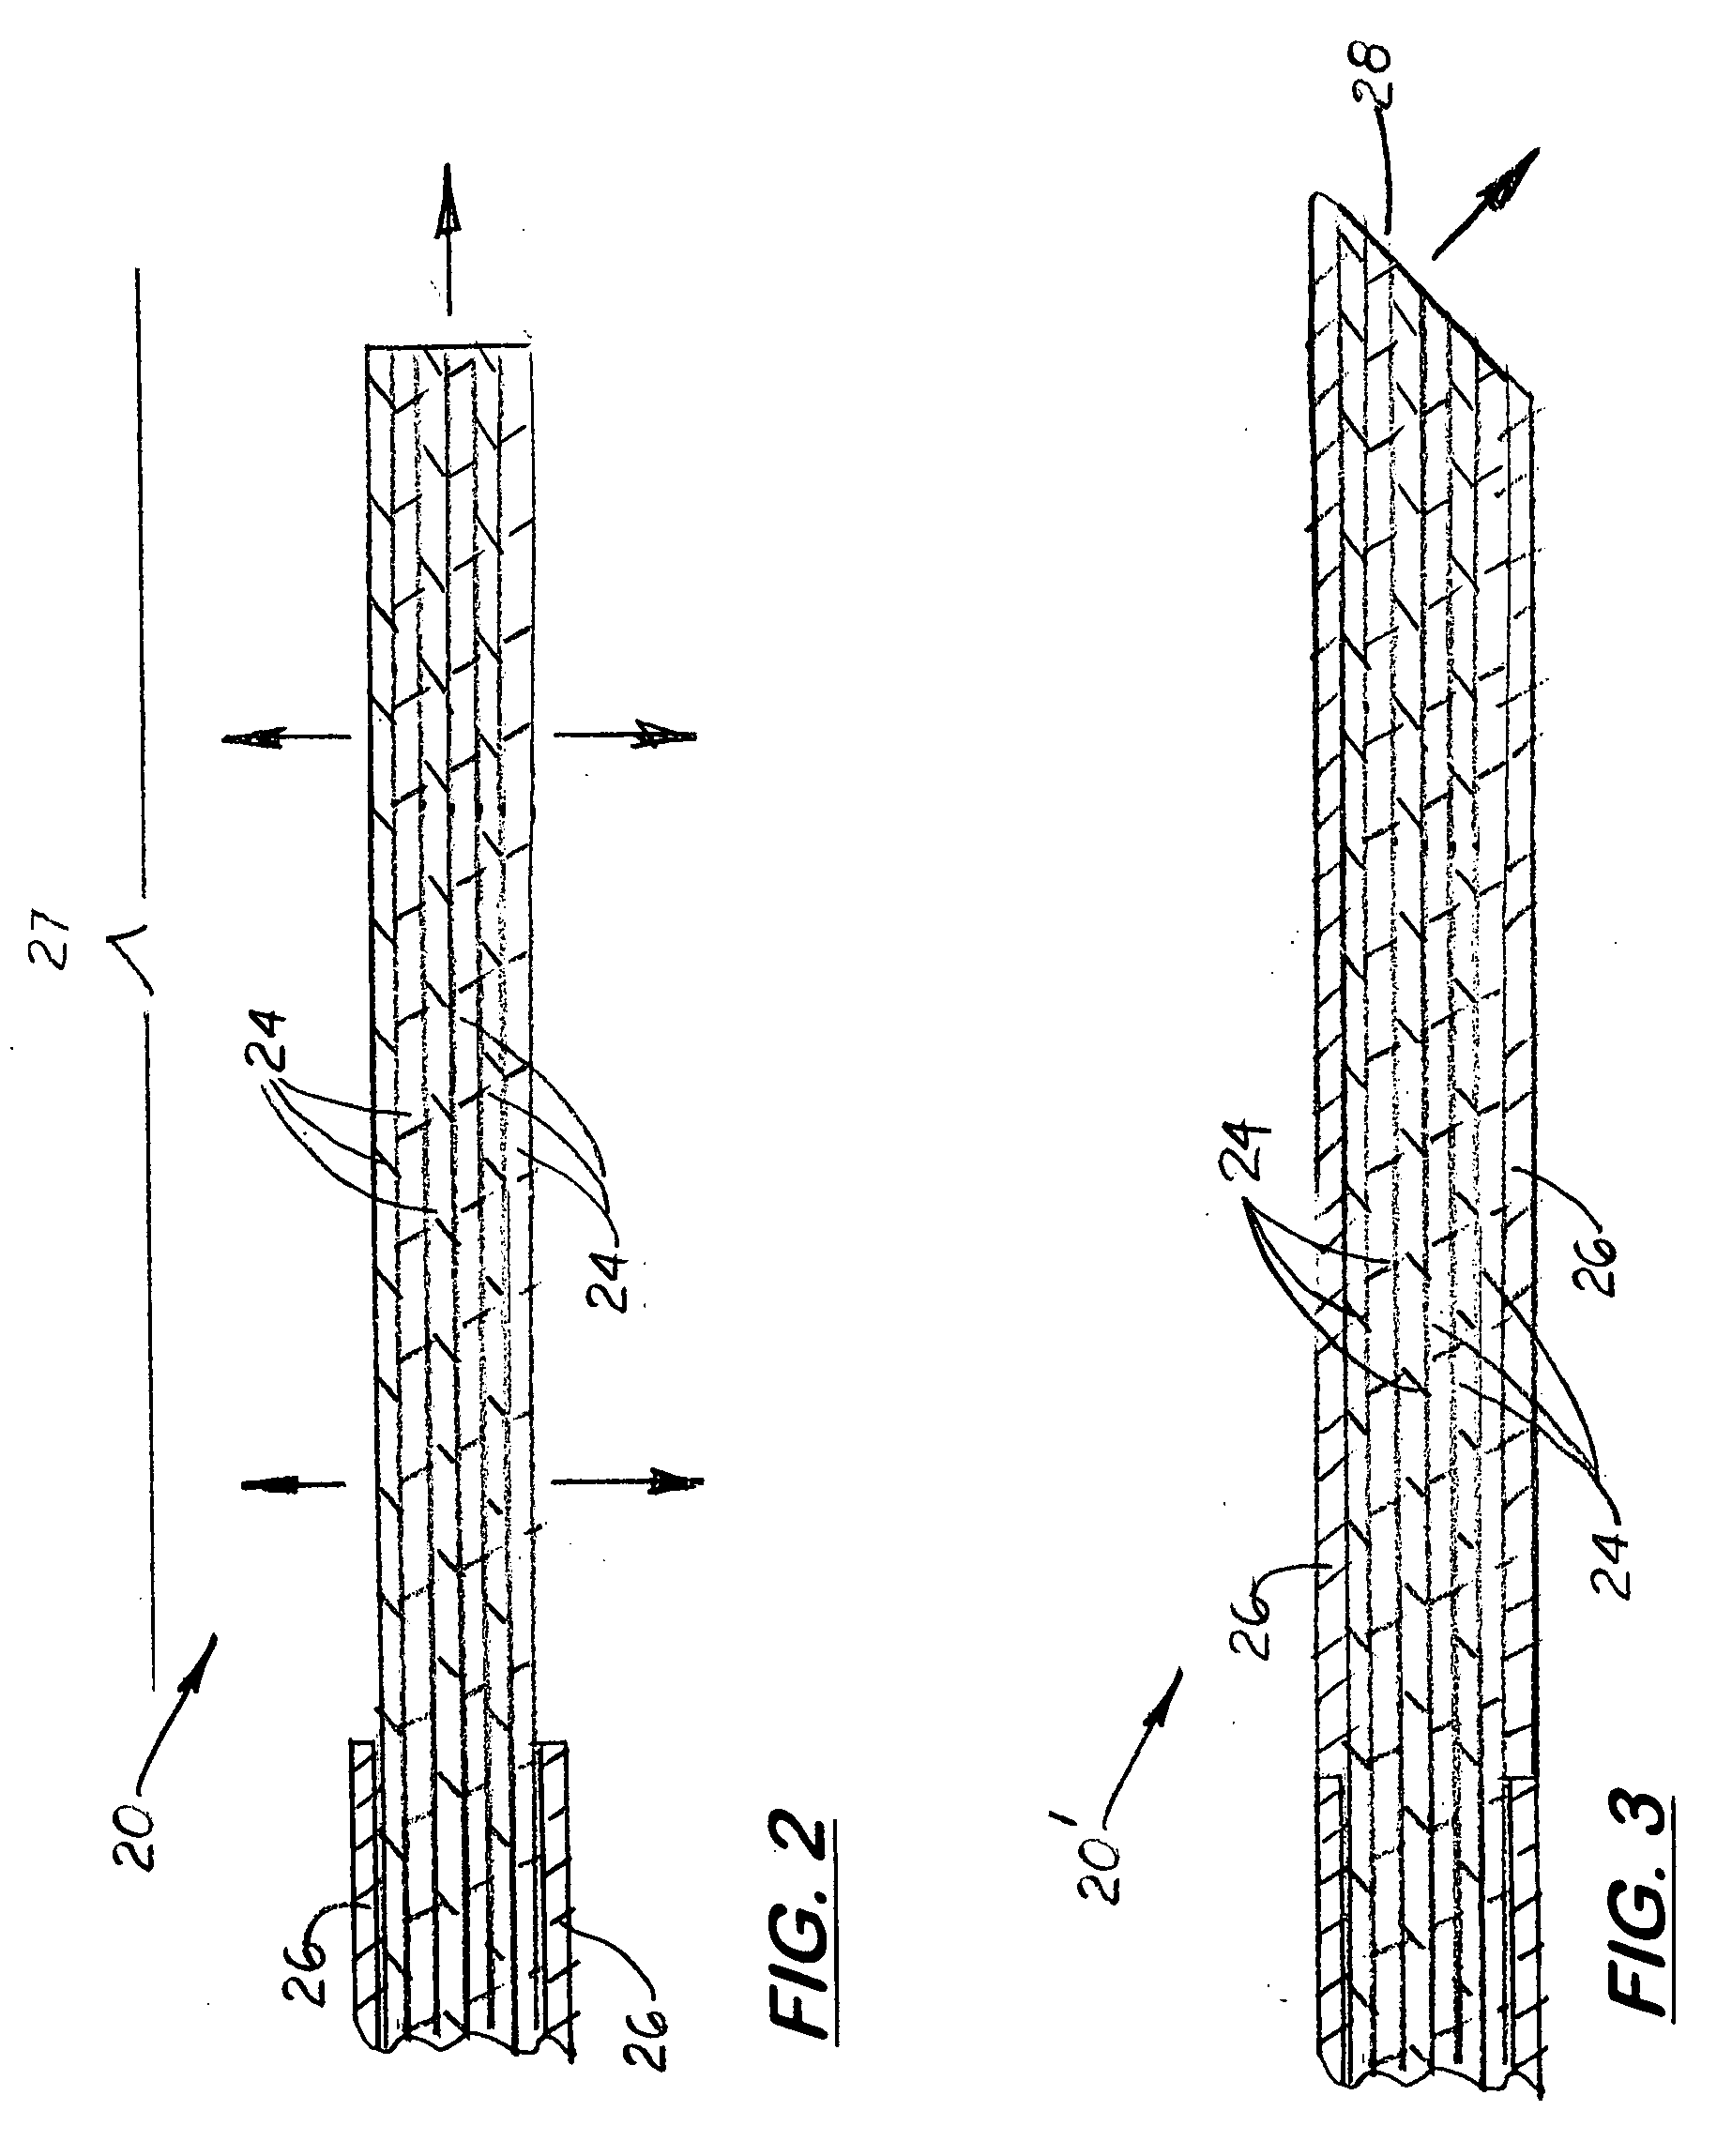 Optical skin germicidal device and method